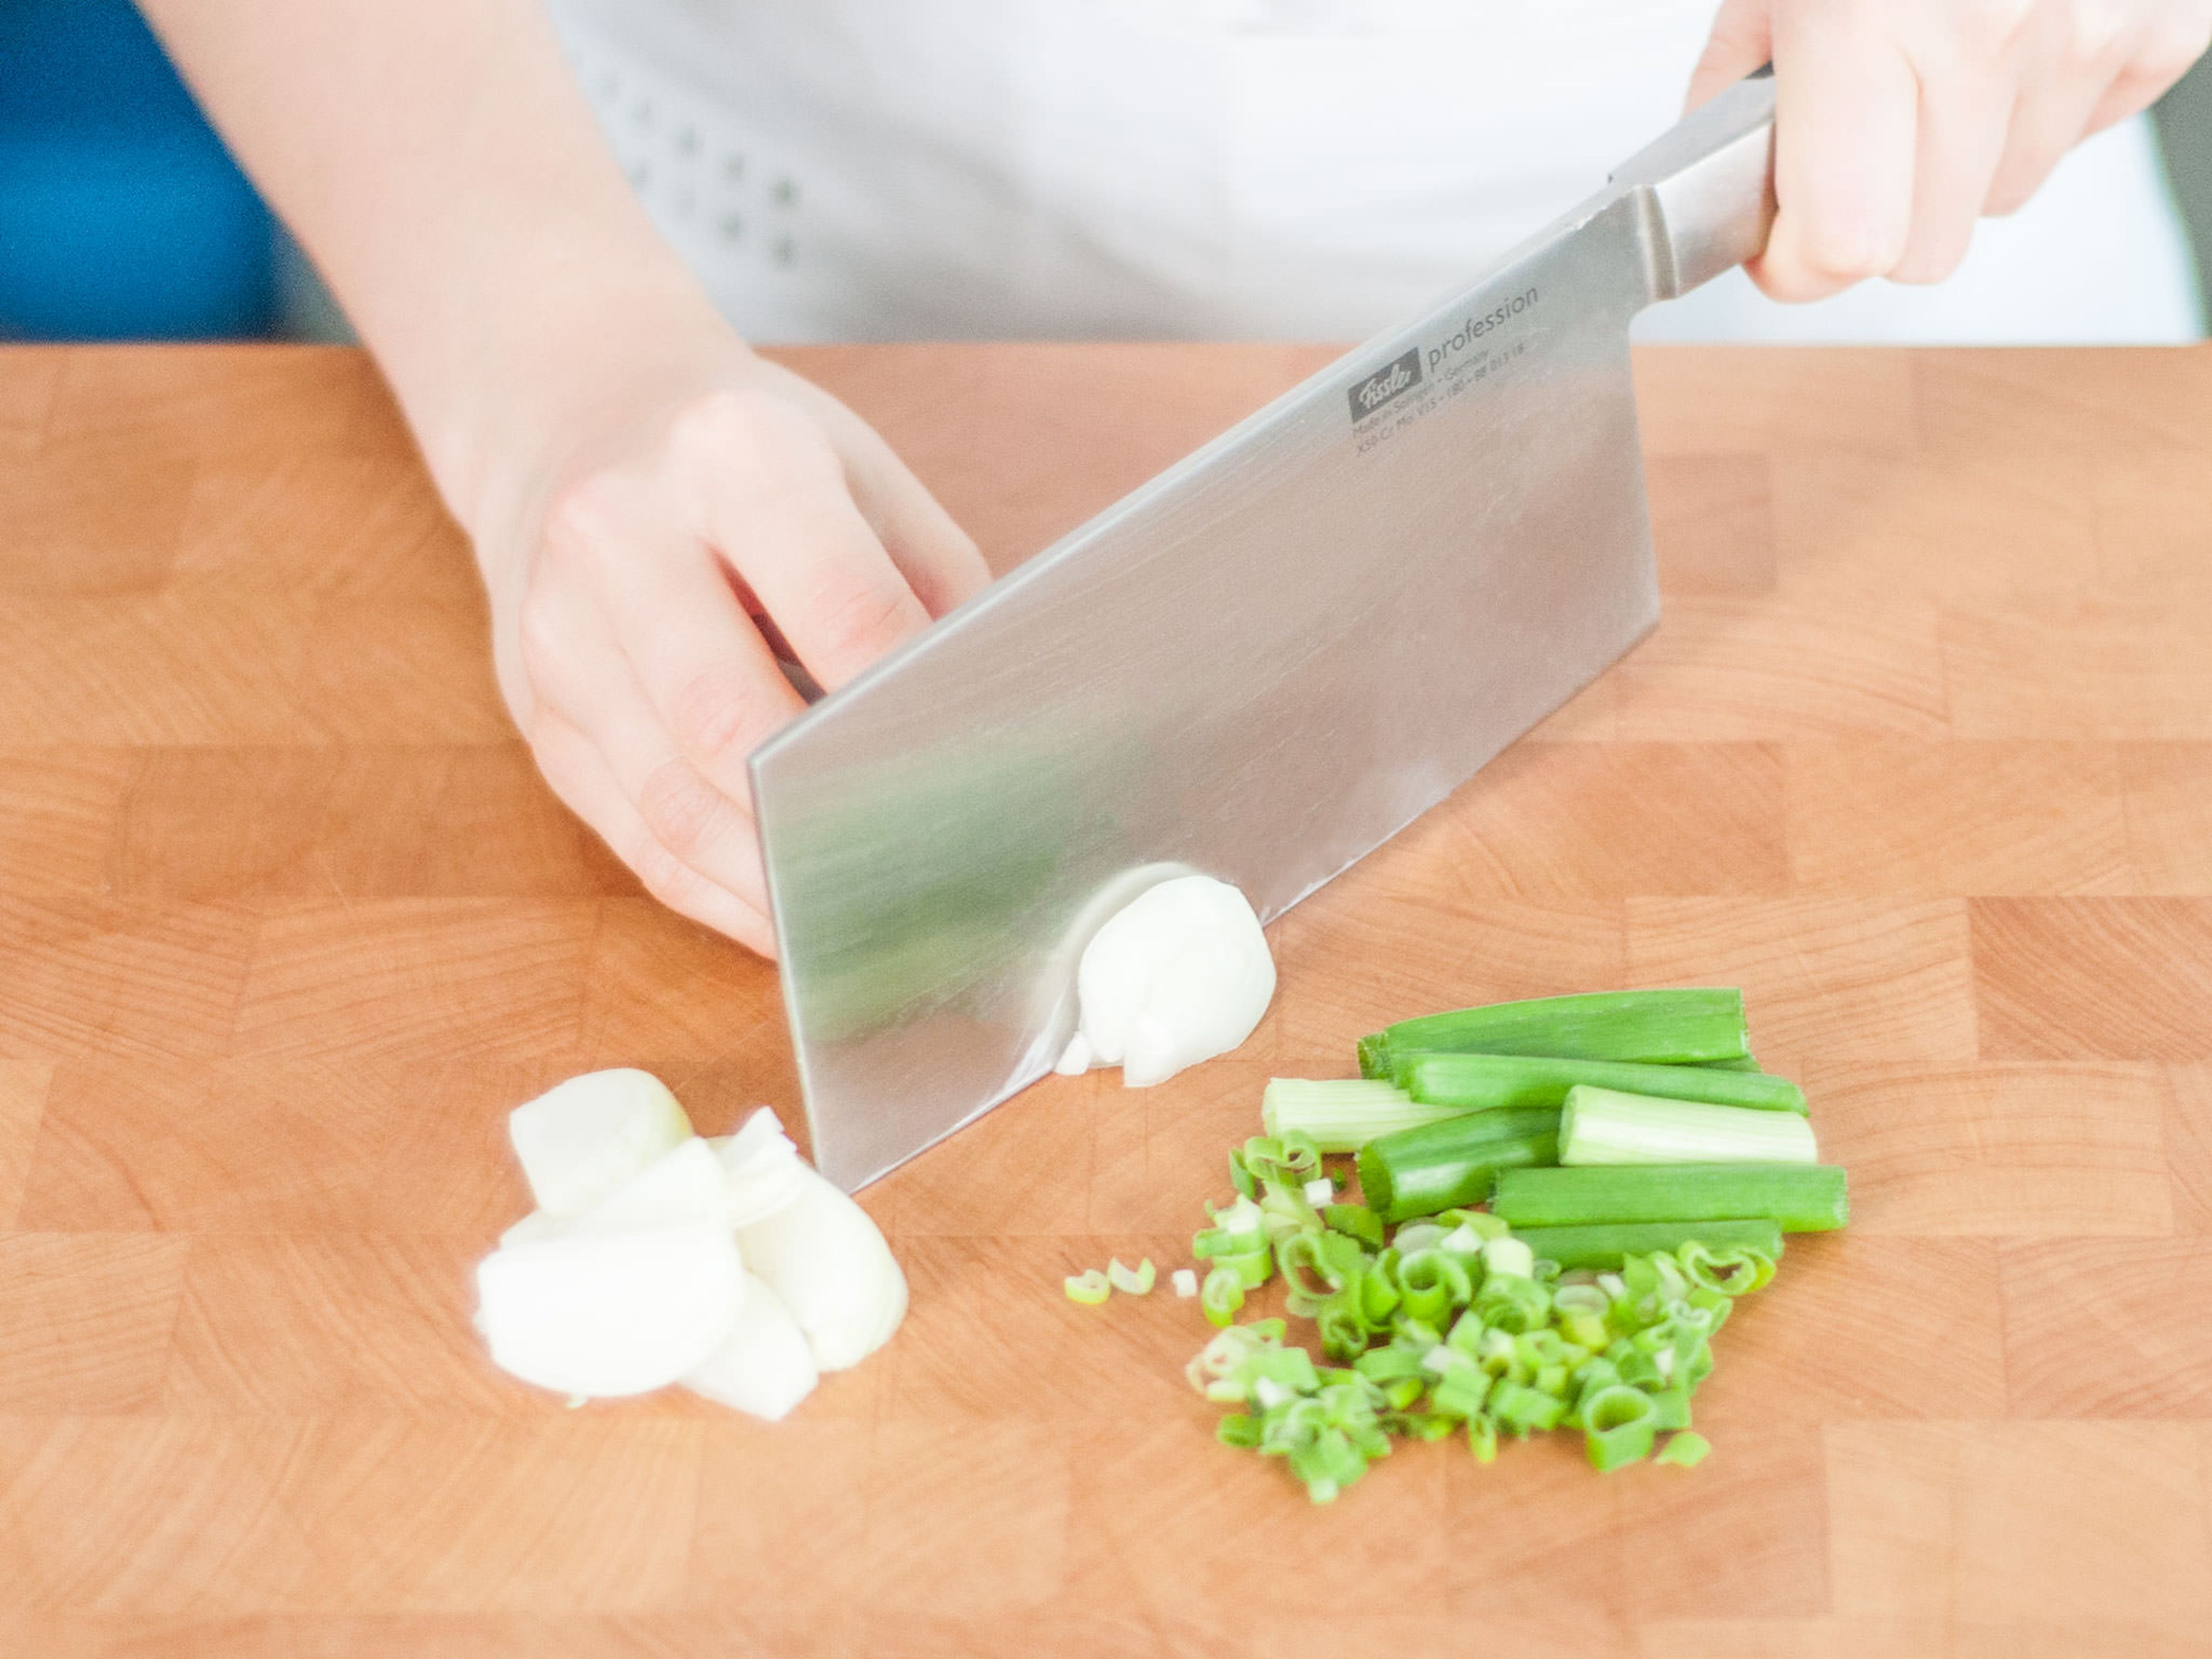 Halve the white tops of half of the scallions lengthwise, then roughly chop them; finely chop remaining scallions. Julienne the onion.